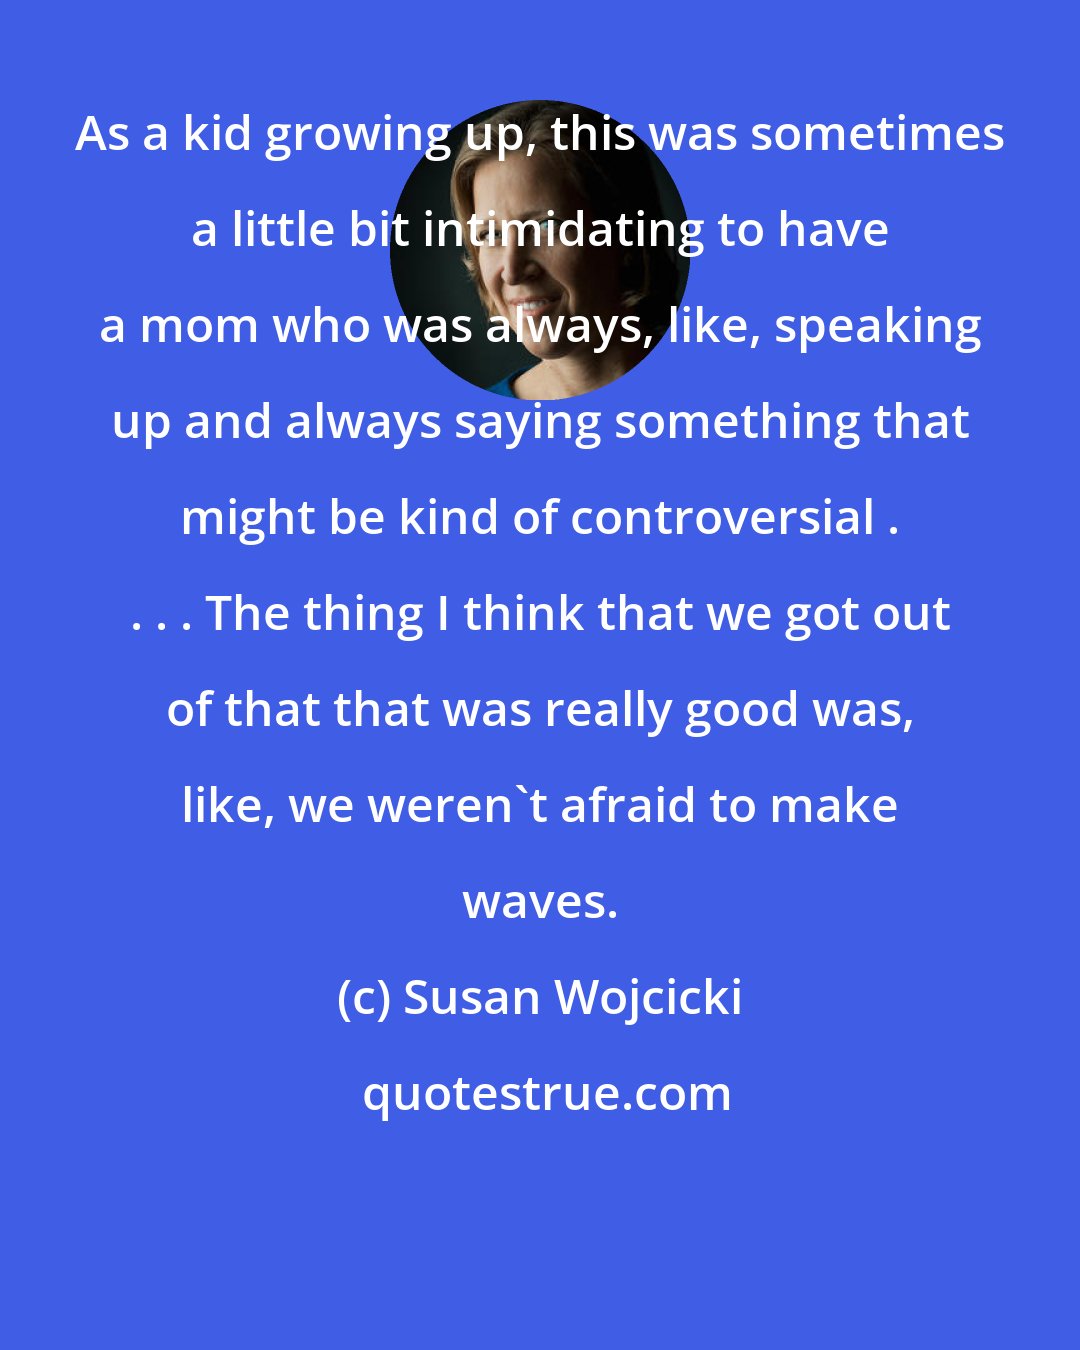 Susan Wojcicki: As a kid growing up, this was sometimes a little bit intimidating to have a mom who was always, like, speaking up and always saying something that might be kind of controversial . . . . The thing I think that we got out of that that was really good was, like, we weren't afraid to make waves.